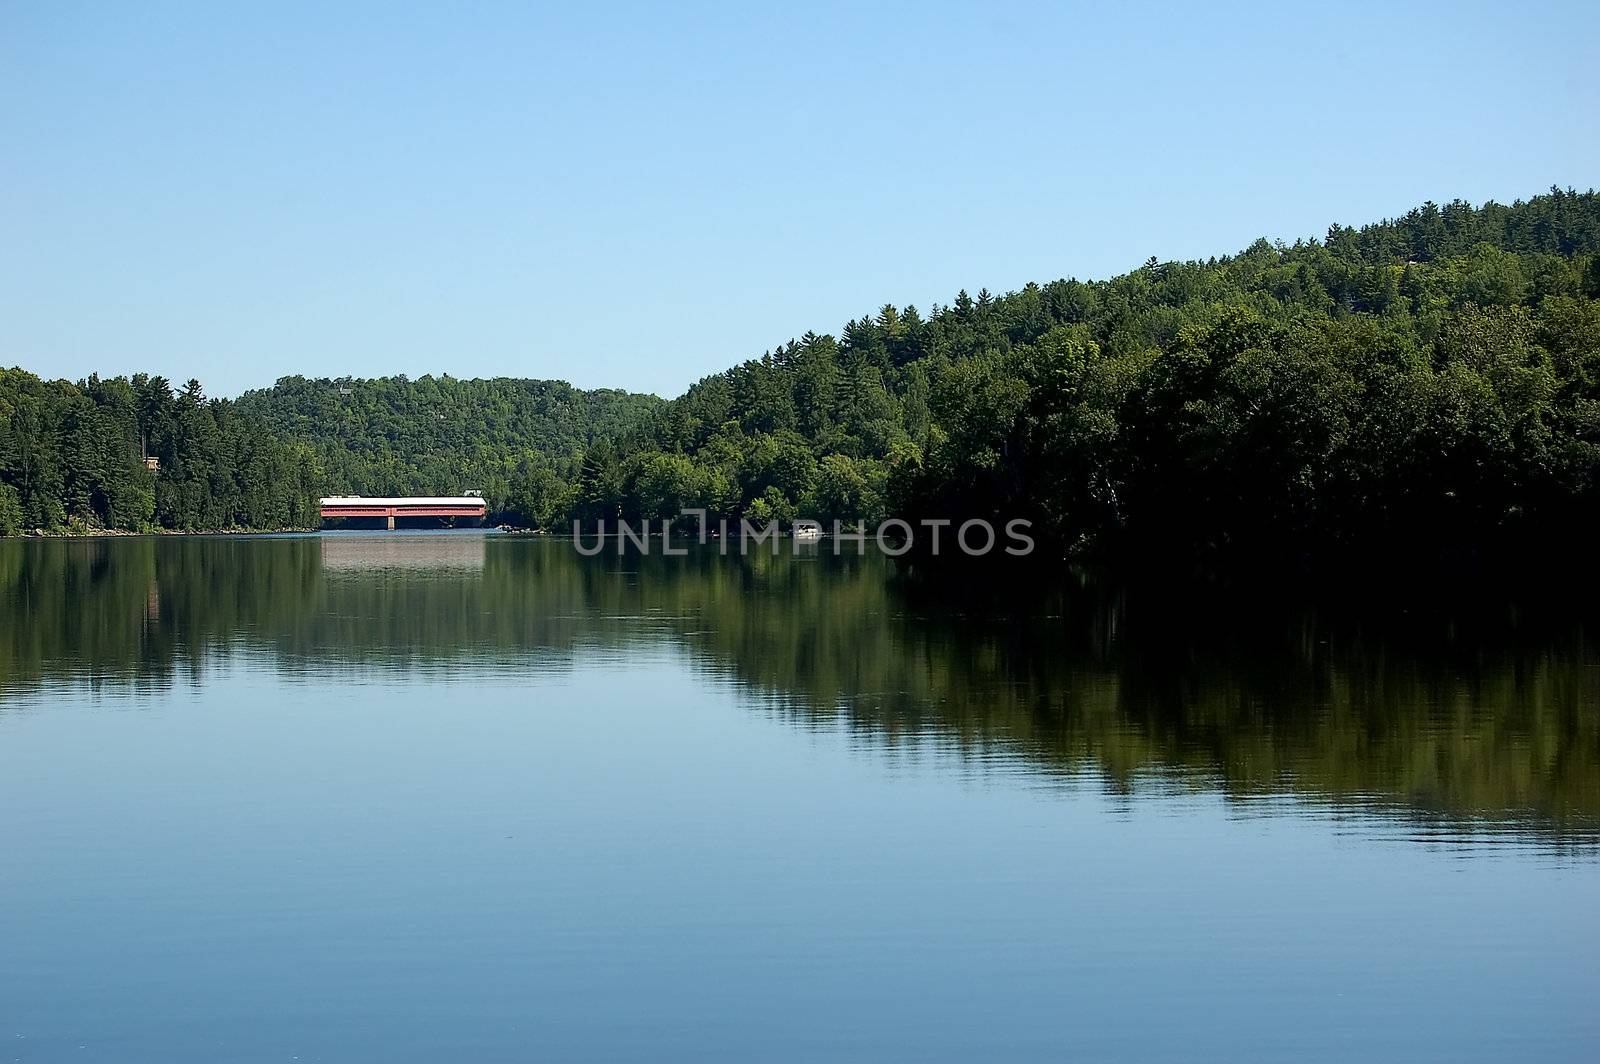 A calm river with a covered bridge in the distance